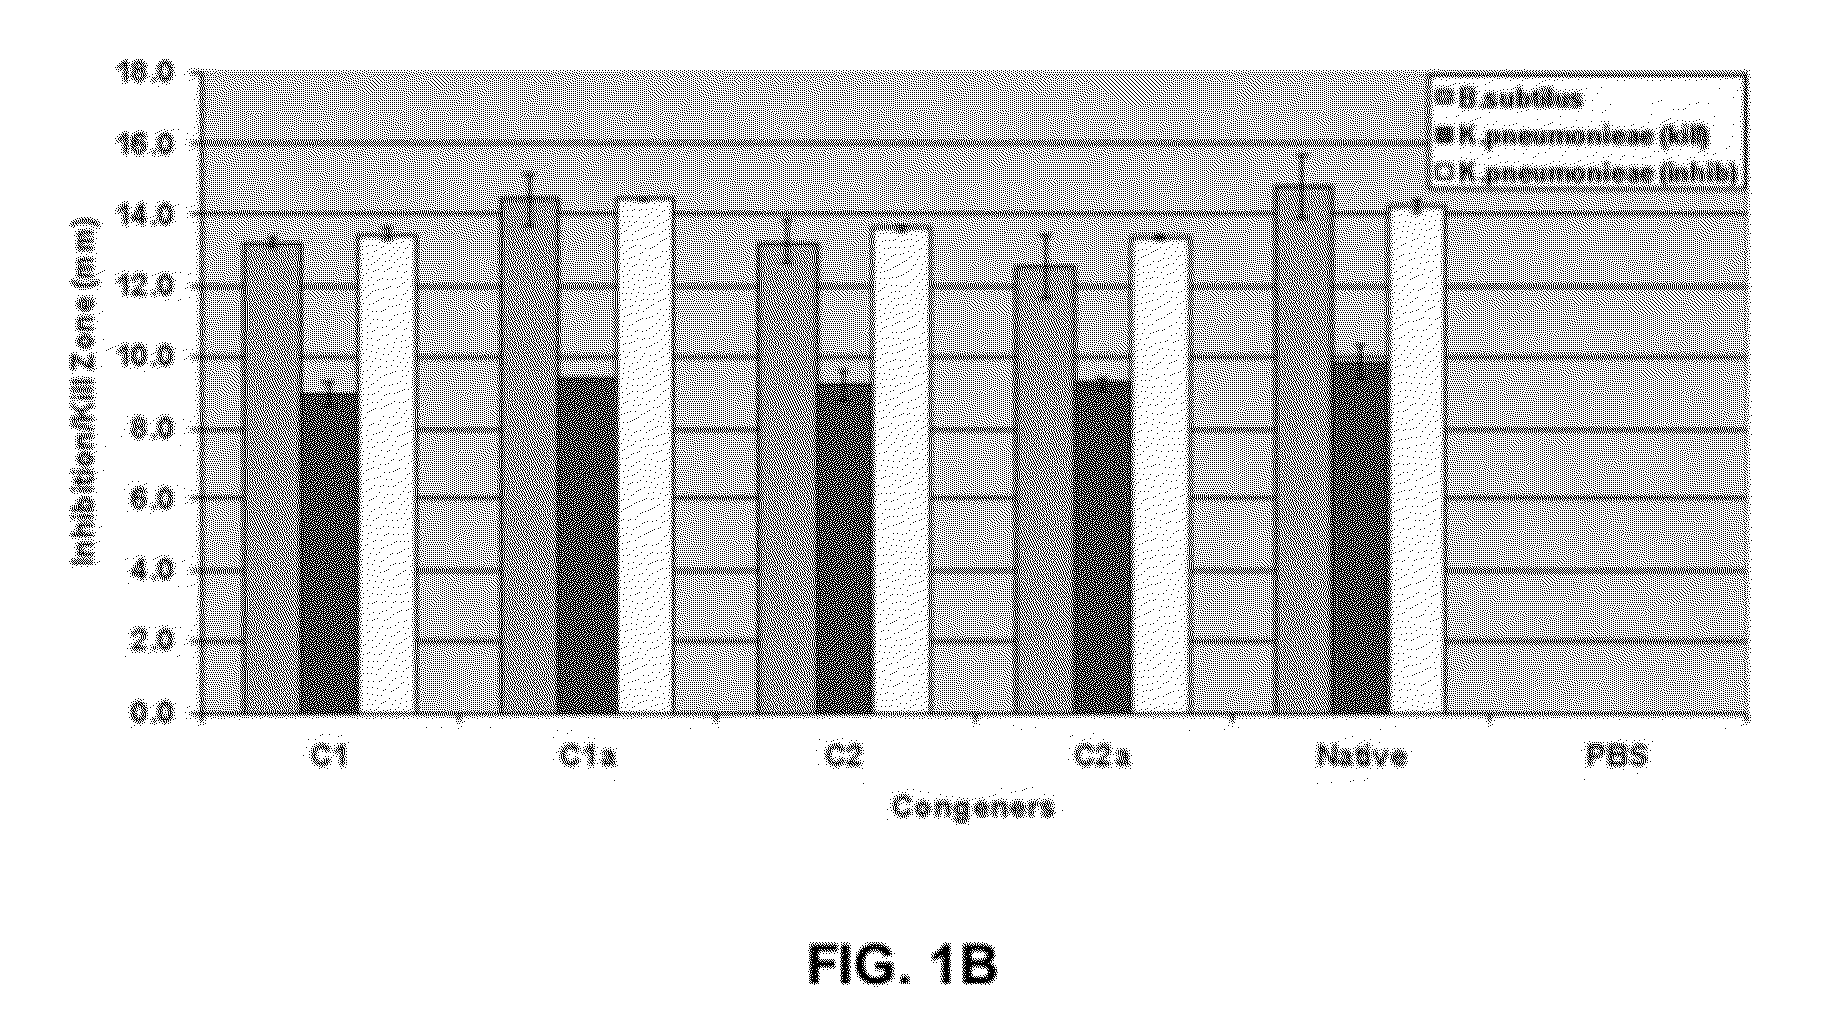 Materials and methods for treating diseases caused by genetic disorders using aminoglycosides and derivatives thereof which exhibit low nephrotoxicity